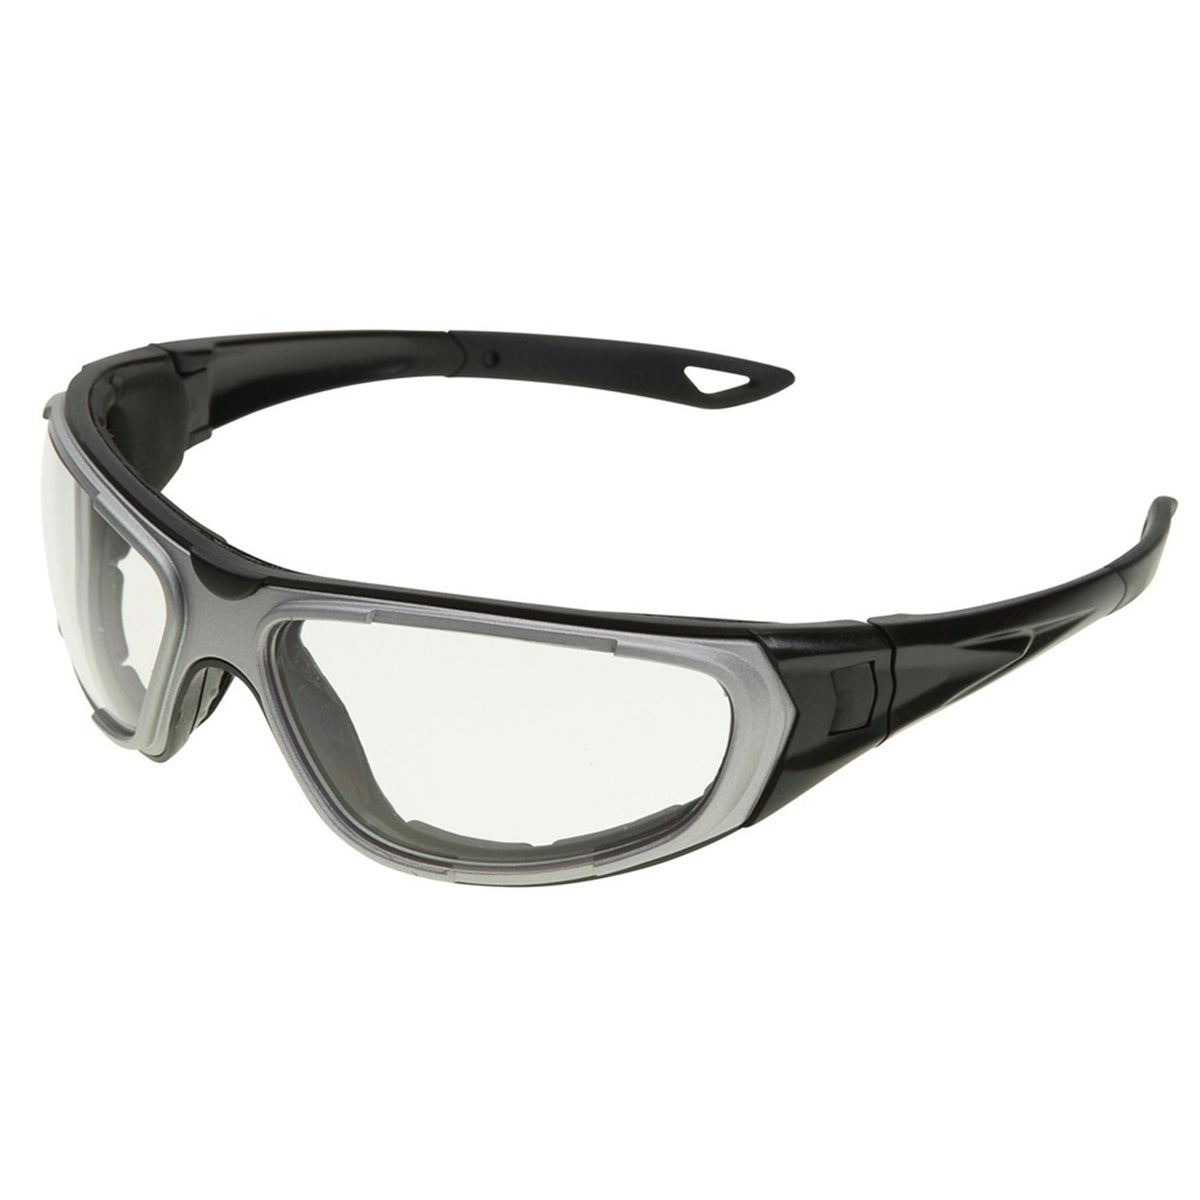 NT2 Safety Glasses with Anti-Fog Lens 1PC